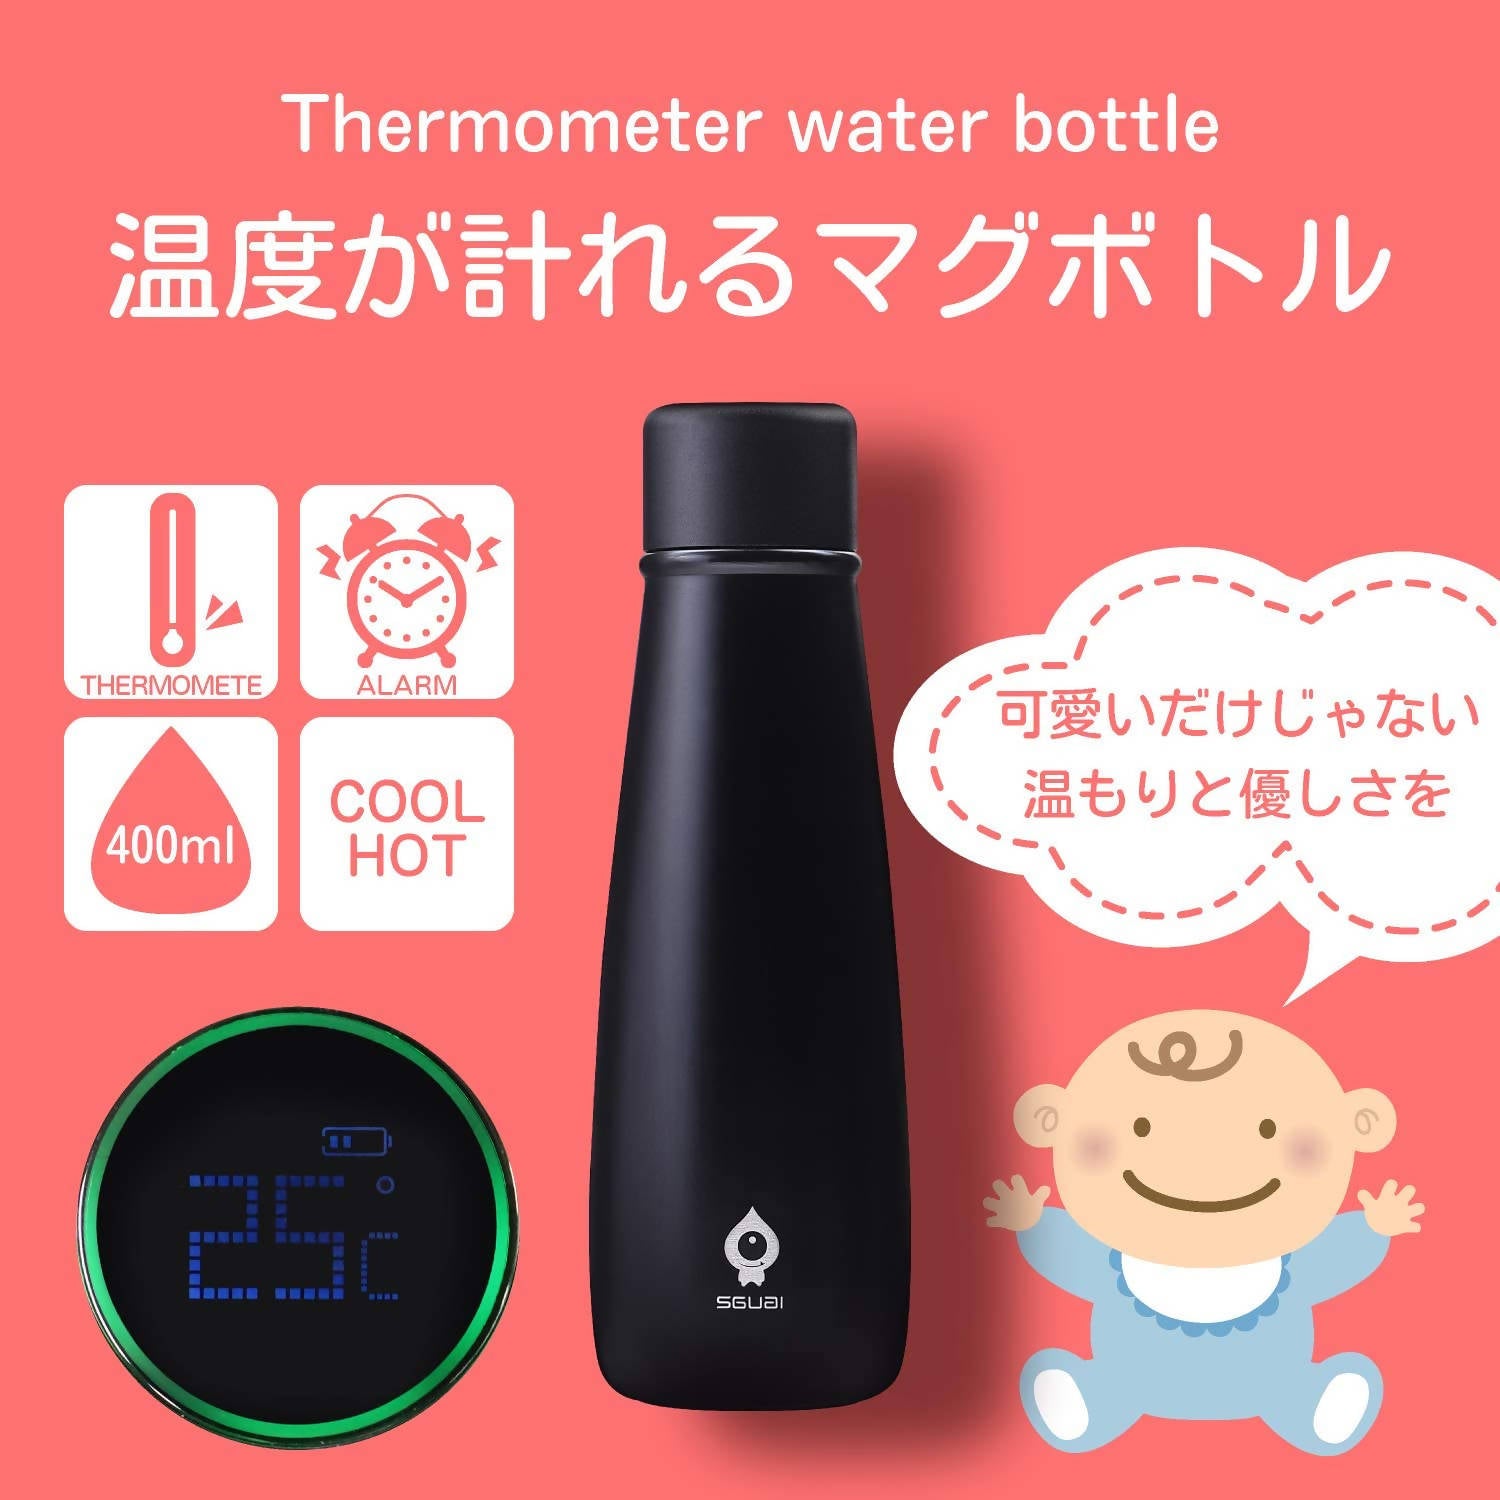 SGUAI Insulated Smart Water Bottle 400ml – with Temperature Display – –  Allegro Japan